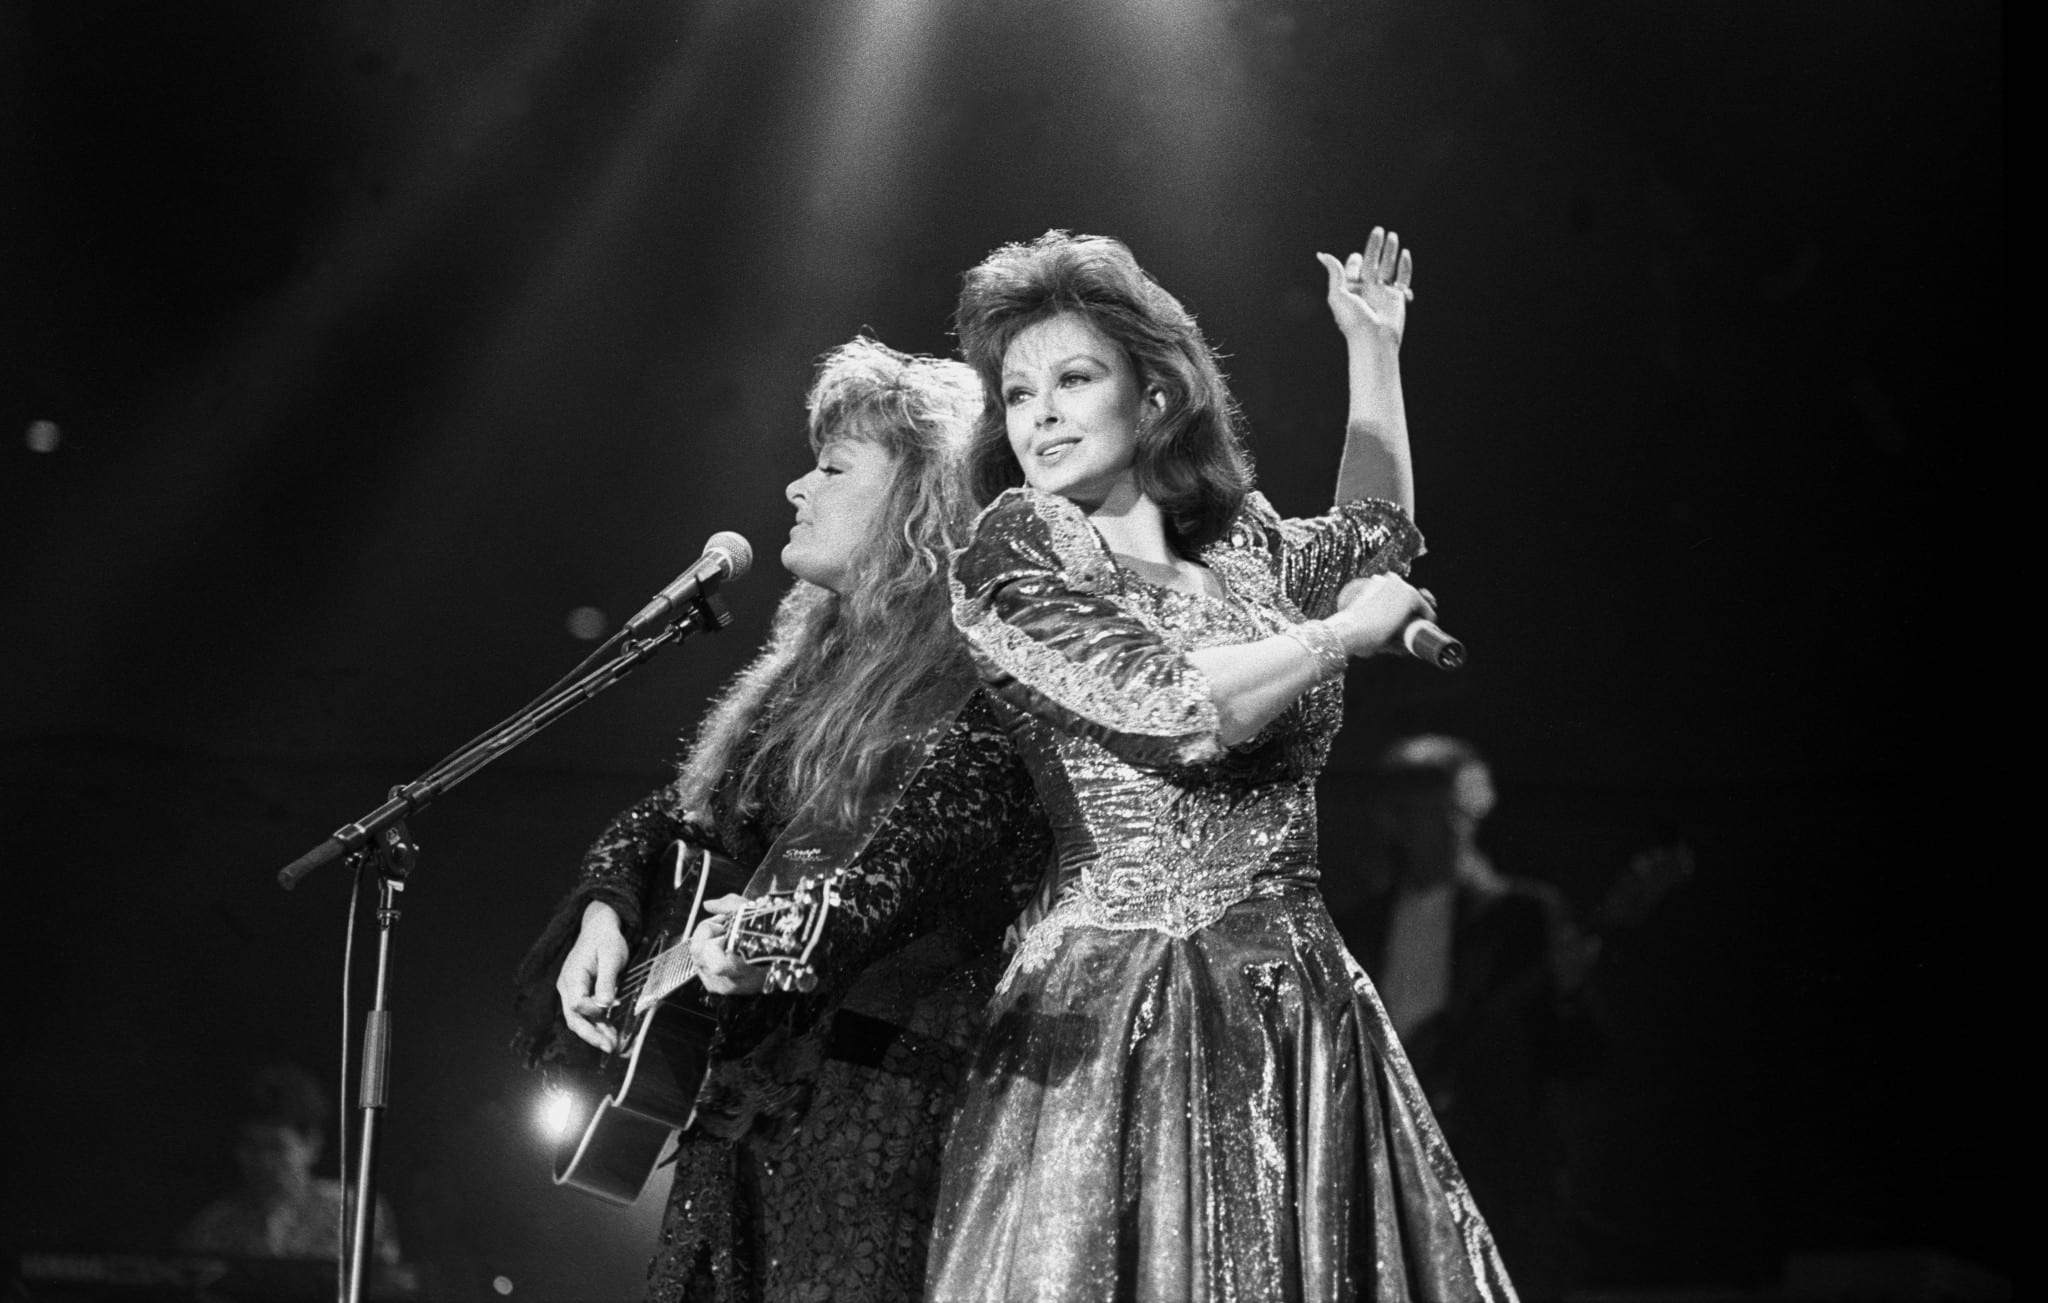 The Judds, who are certainly not a "forgotten" country duo